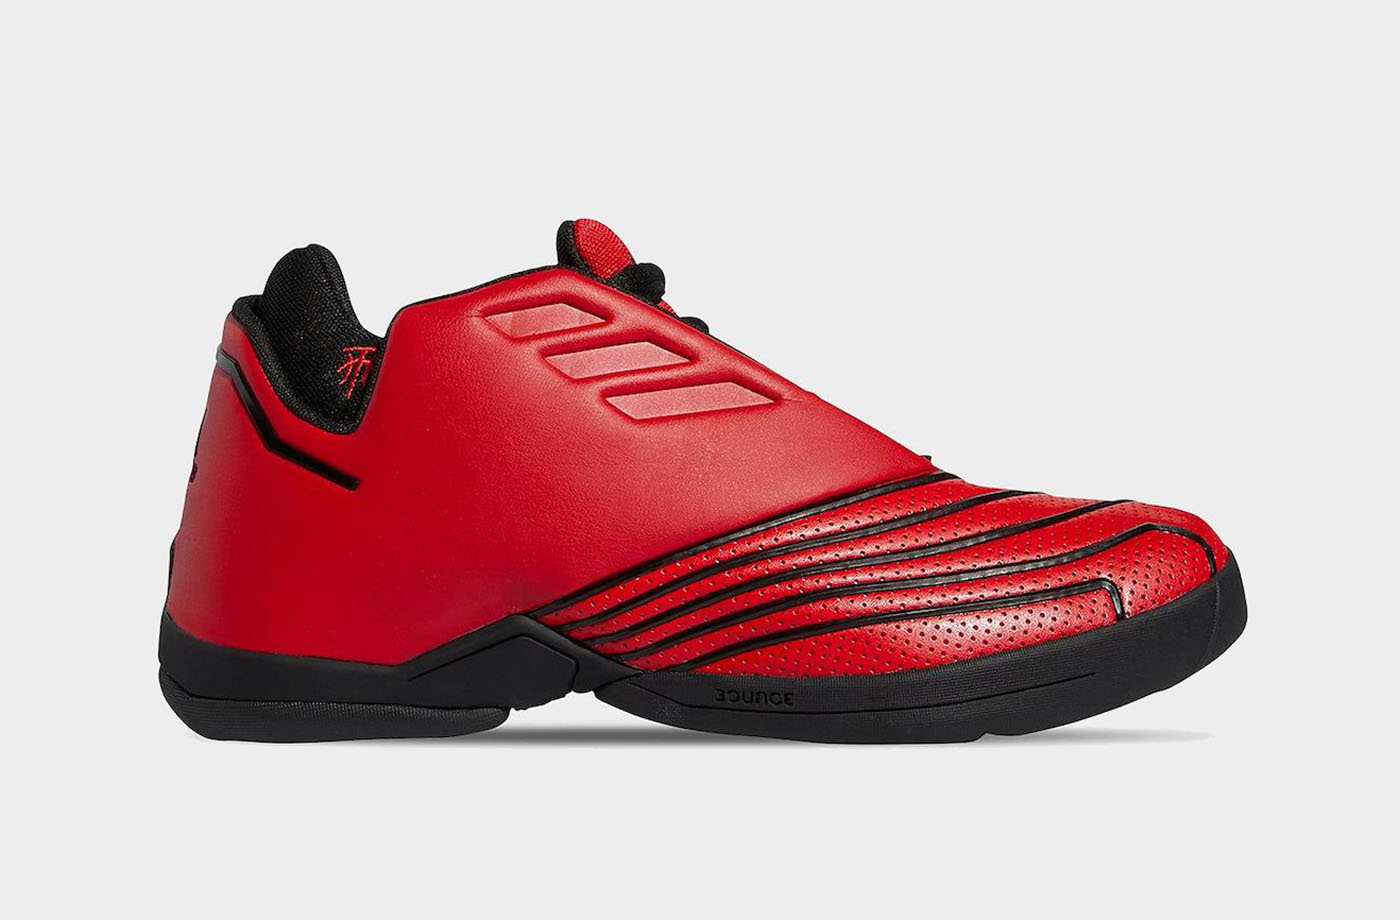 Another Tracy McGrady adidas Retro Is Returning Soon